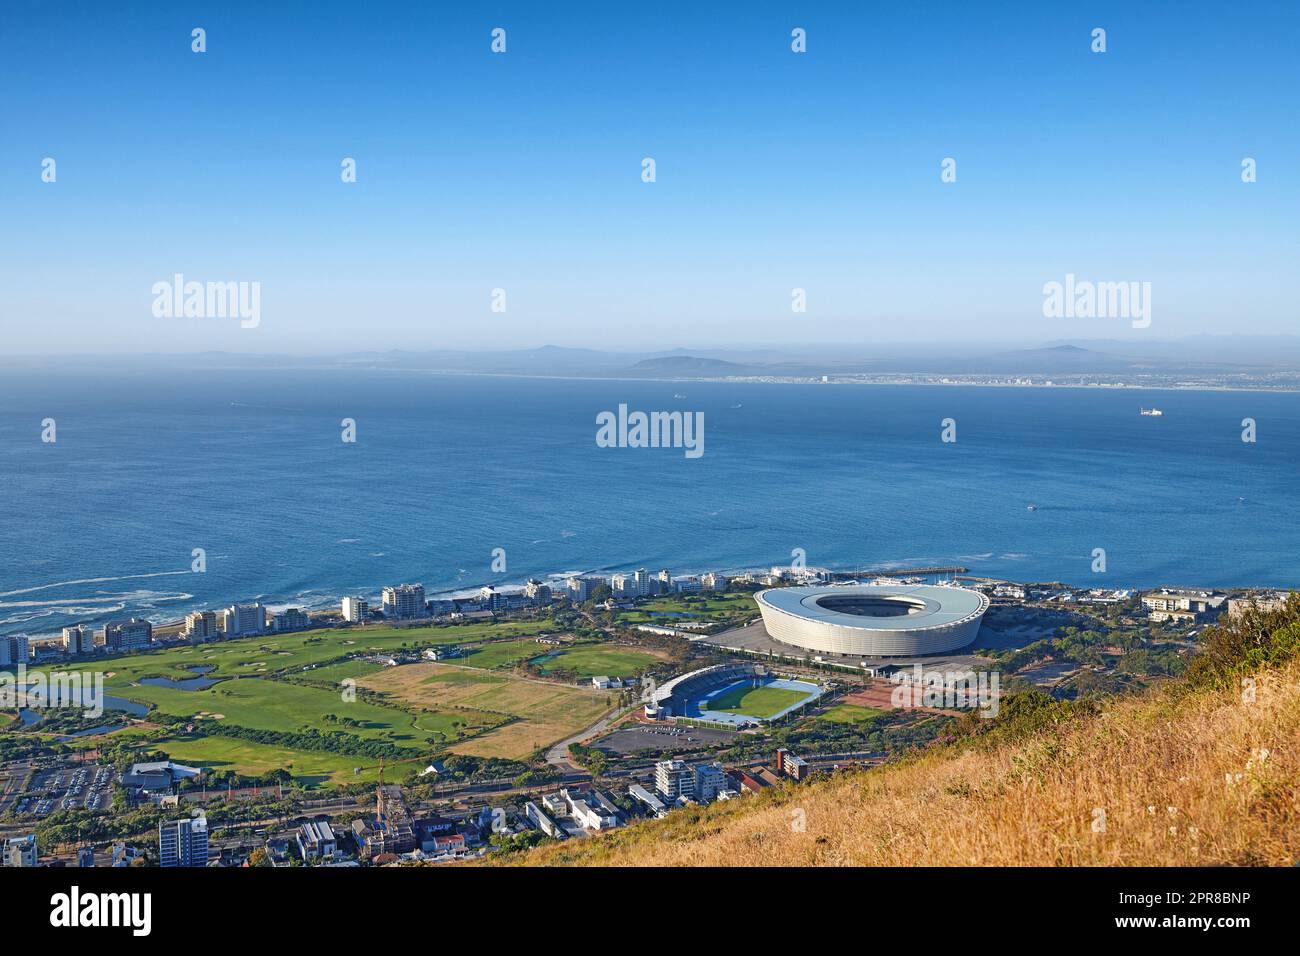 Above panoramic photo of a the central business district of Cape Town, Western Cape, South Africa. A busy peninsula where land meets sea against a cloudscaped blue sky. A beautiful mountainside city Stock Photo